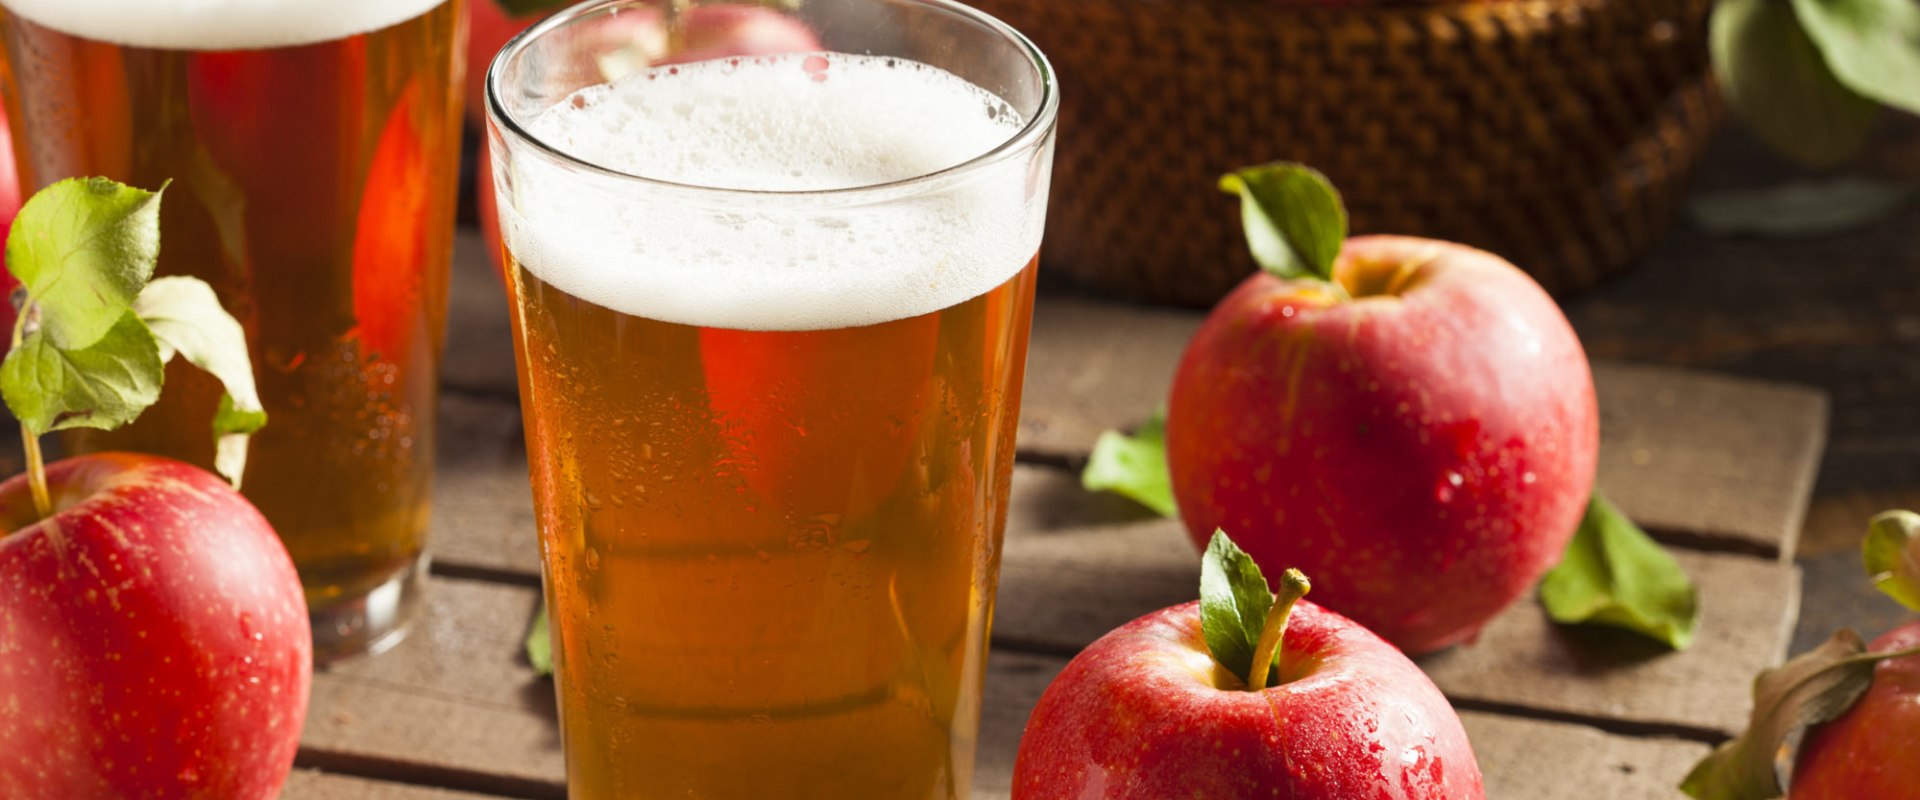 What is hard cider considered?